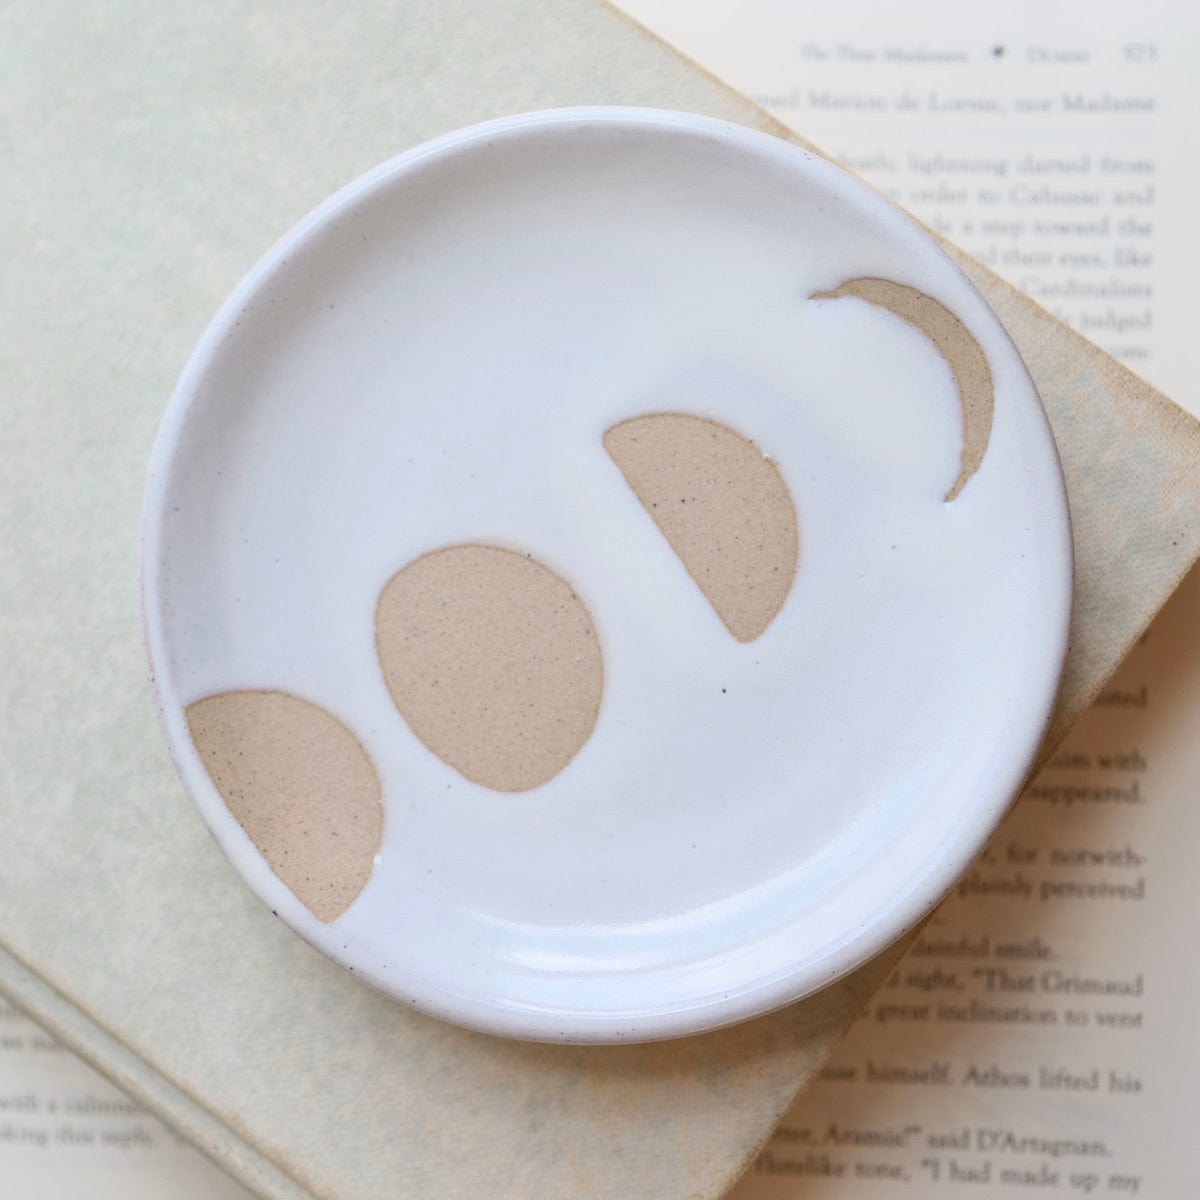 GIFT Ceramic Catch All Dish - Moon Phase